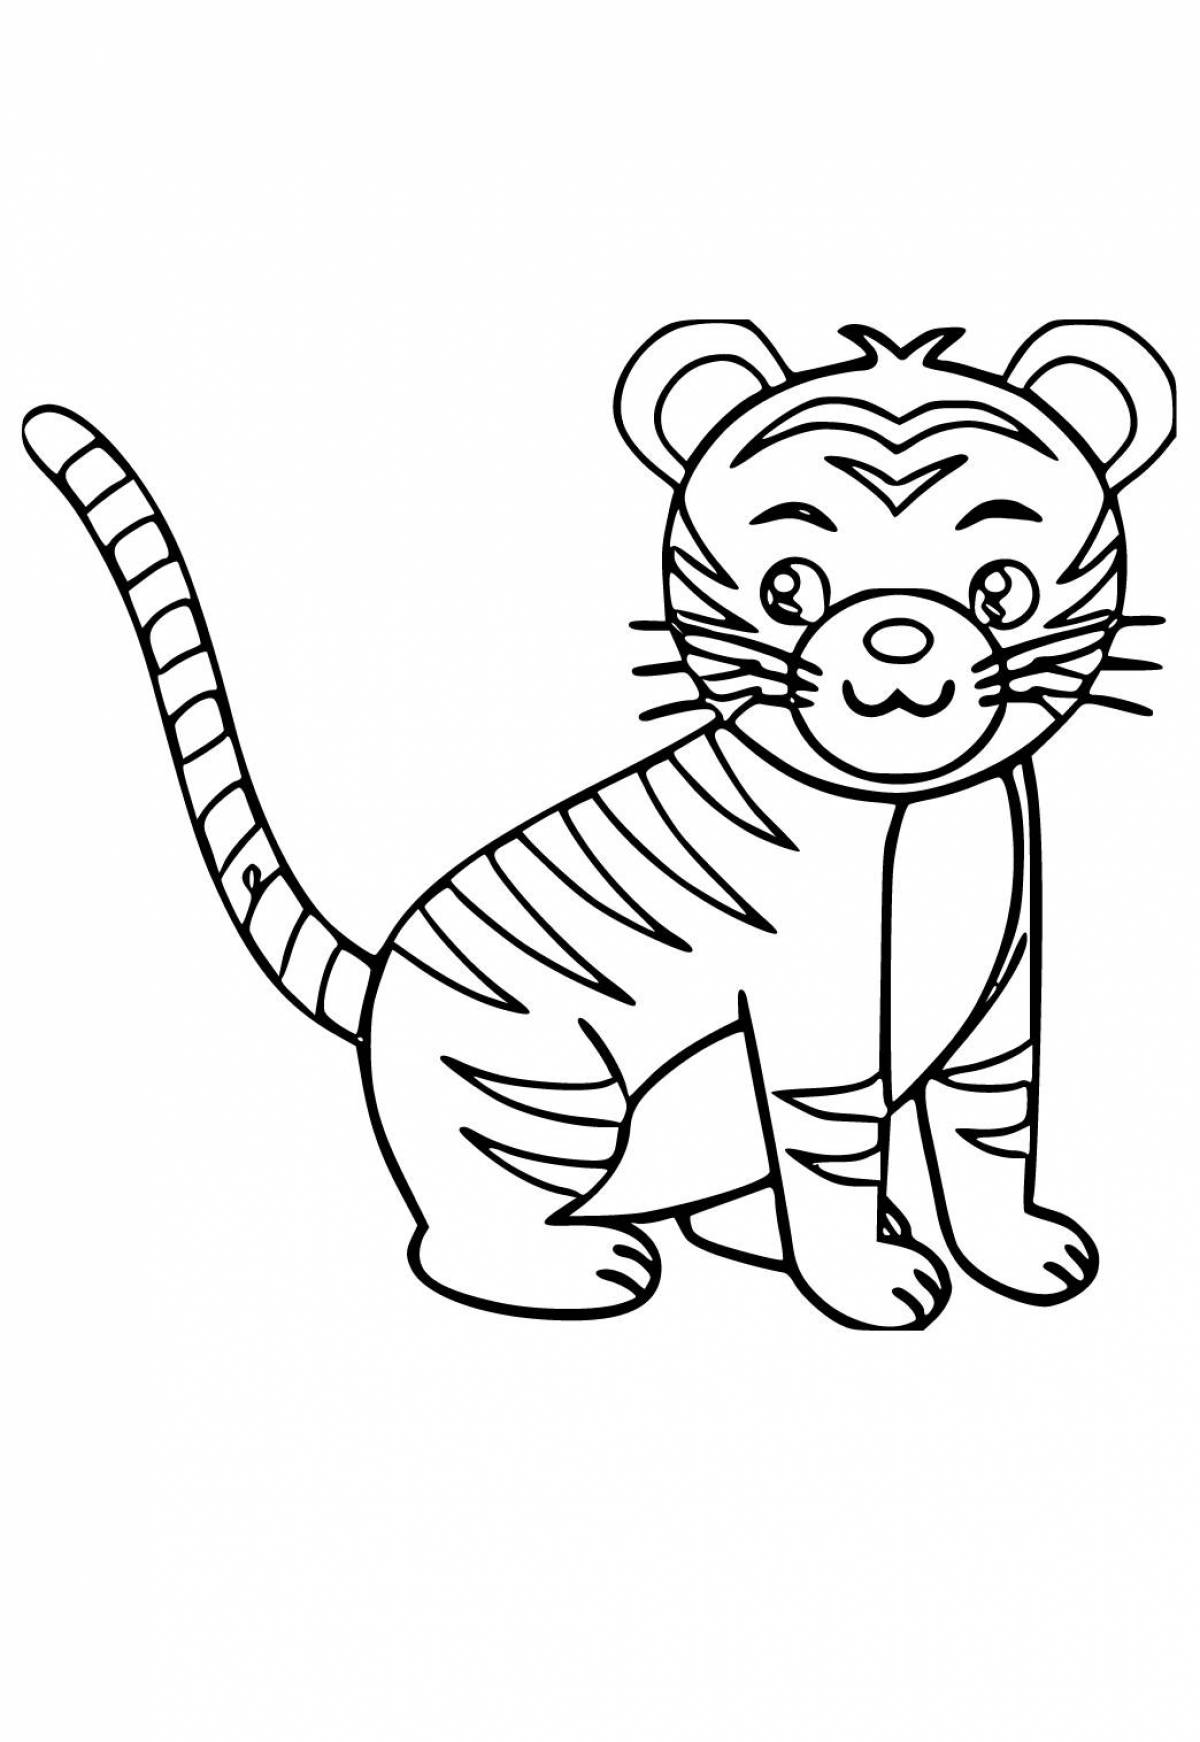 A fun tiger coloring book for kids